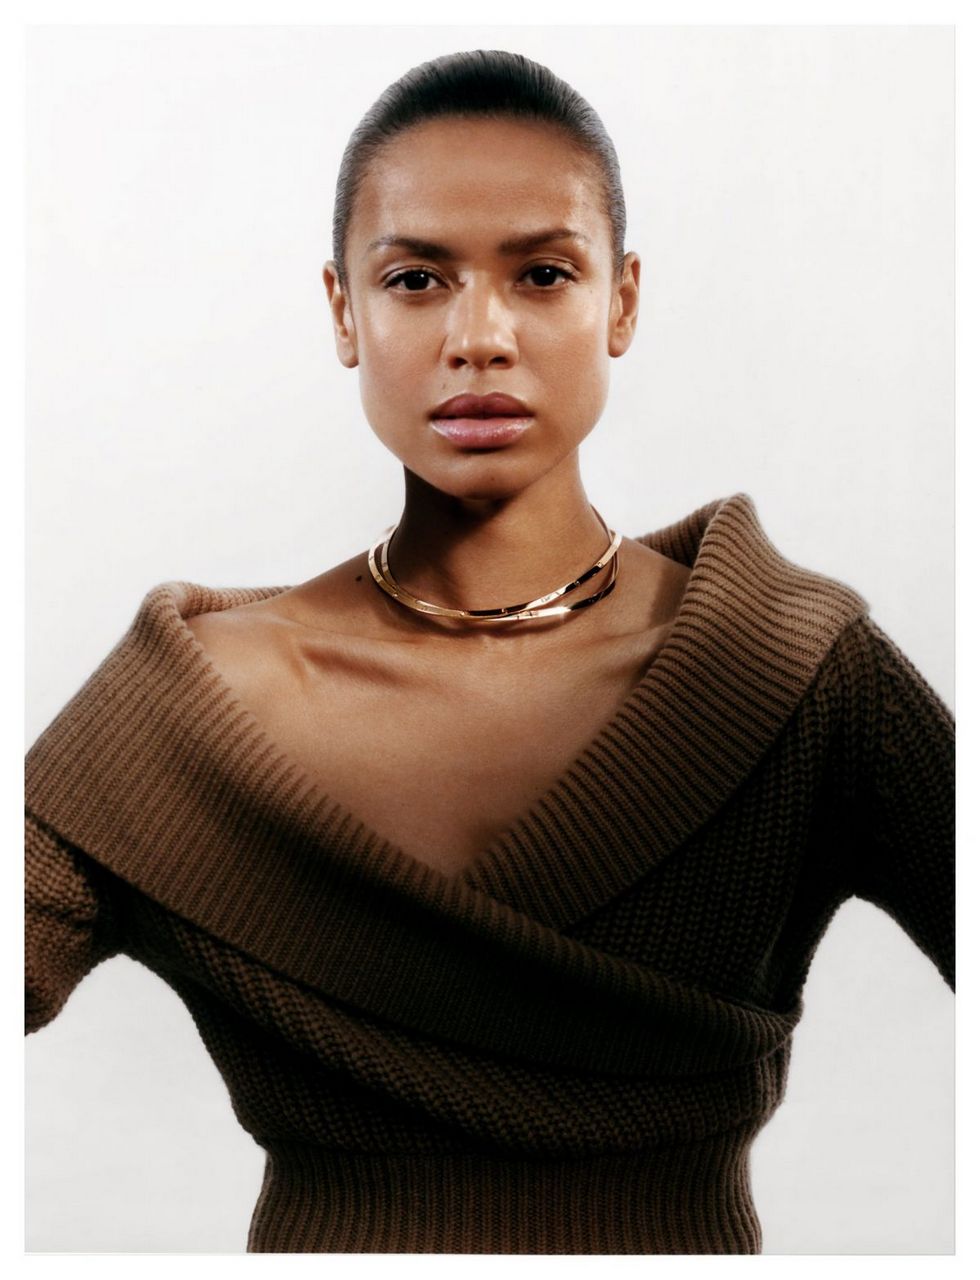 Gugu Mbatha Raw And Jessica Plummer For Interview Magazine February